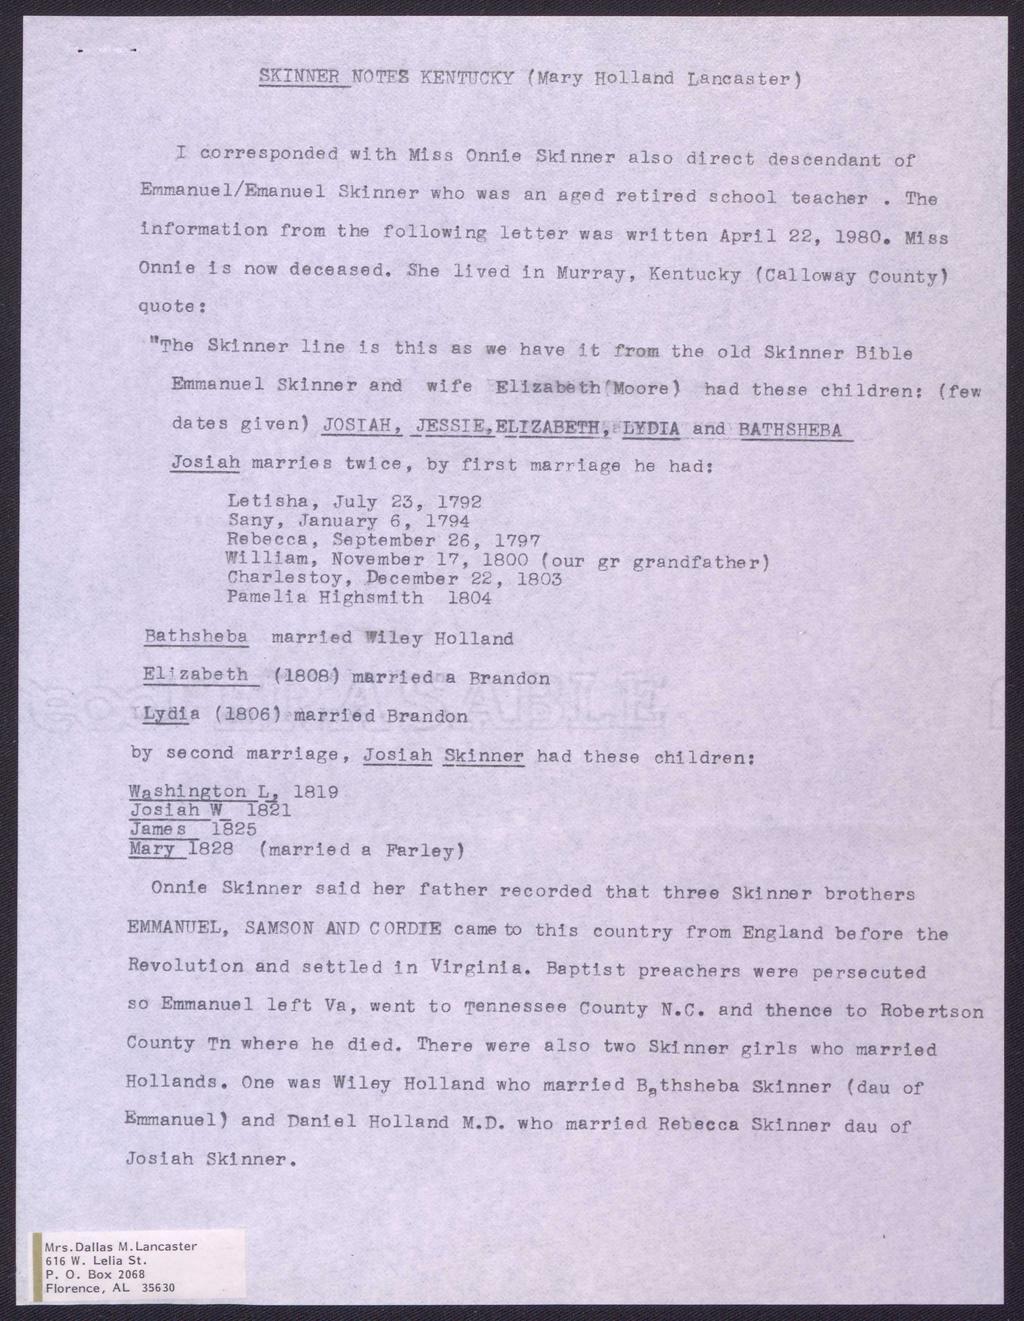 SKINNER NOTES KENTUCKY (Mary Holland Lancaster) I corresponded with Miss Onnie Skinner also direct descendant of Emmanuel/Emanuel Skinner who was an aged retired school teacher The information from